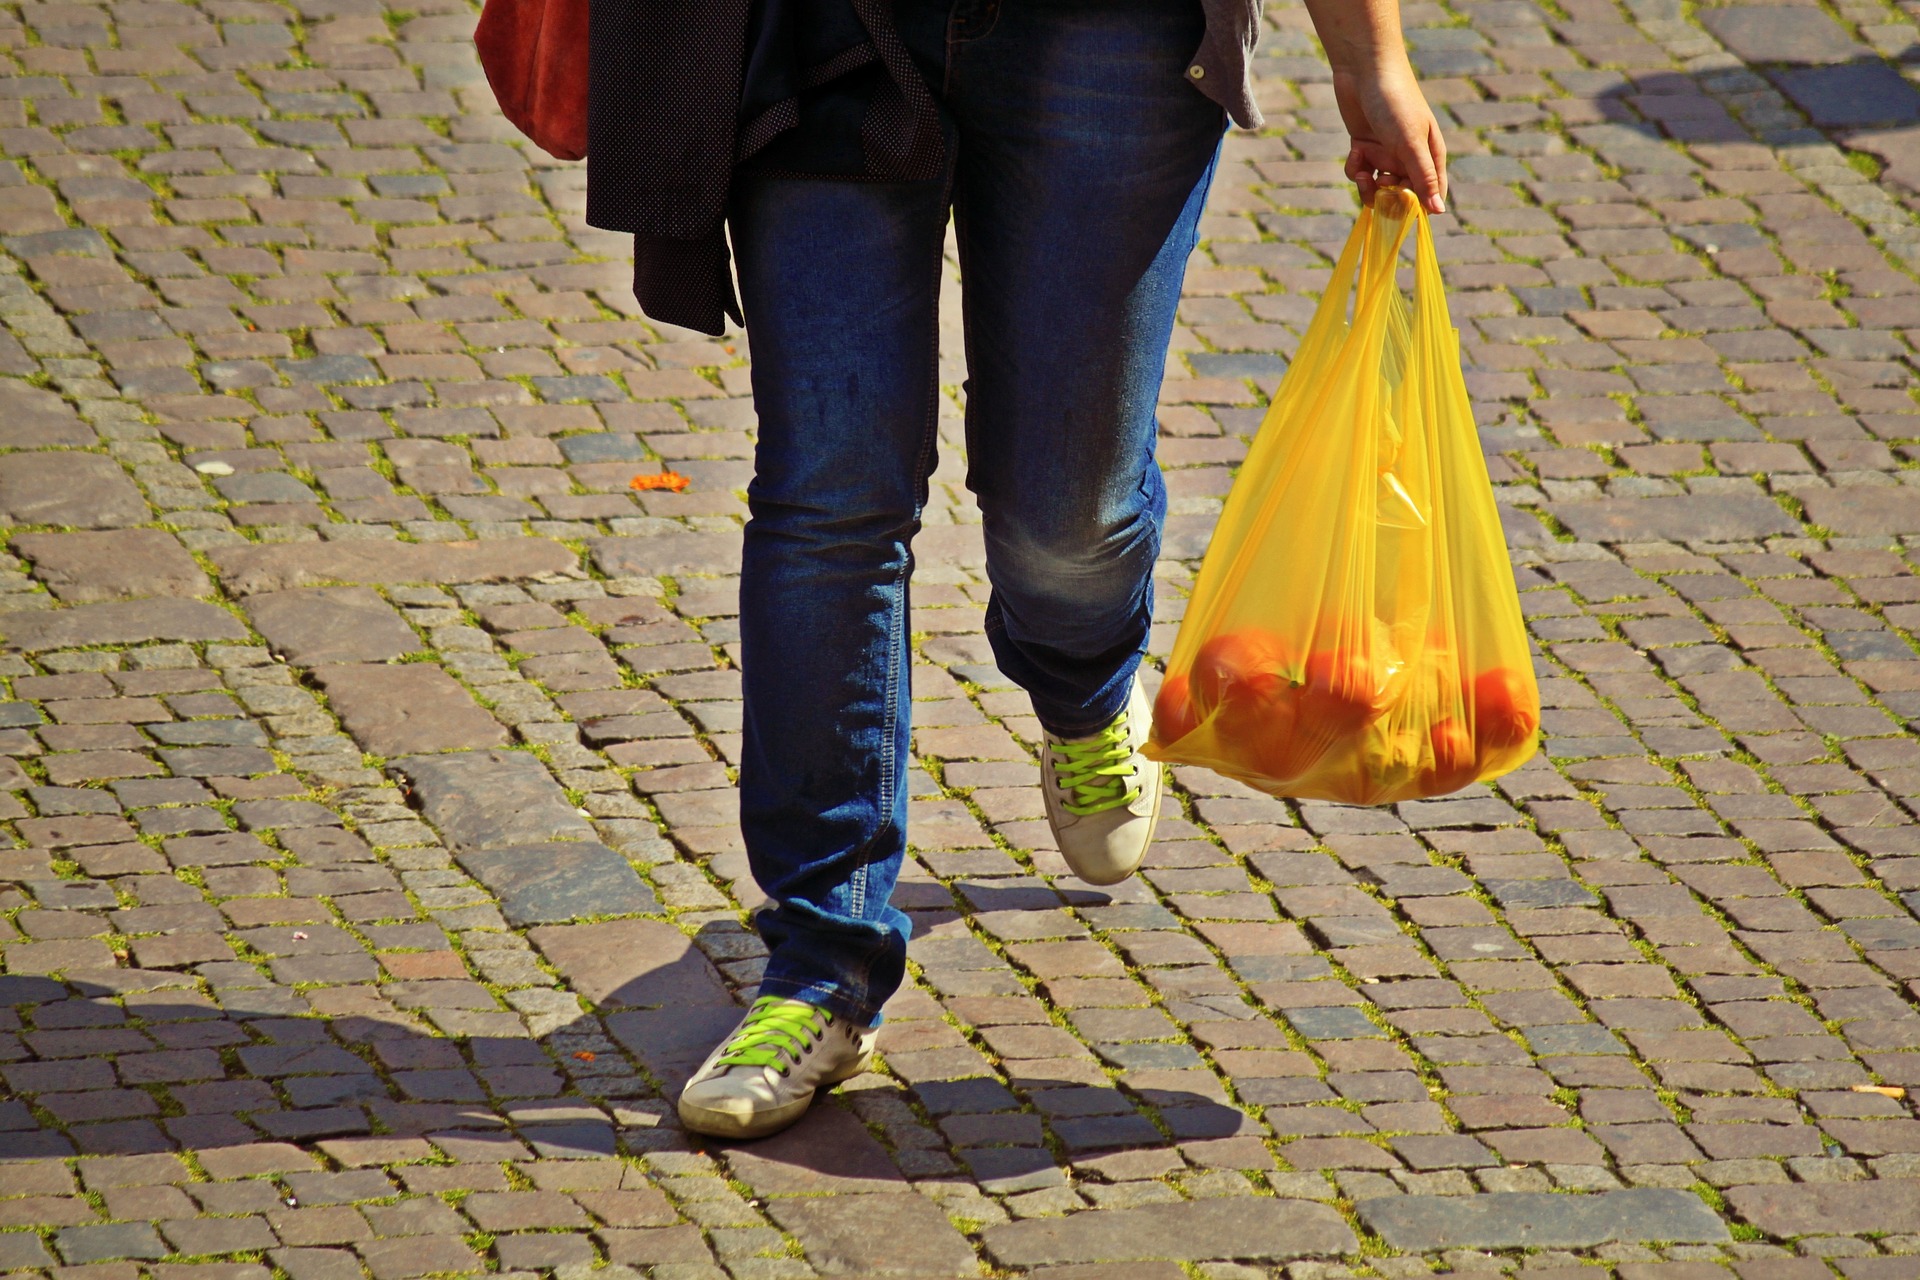 Shanghai and Guangzhou Completely Restrict The Use of Plastic Bags